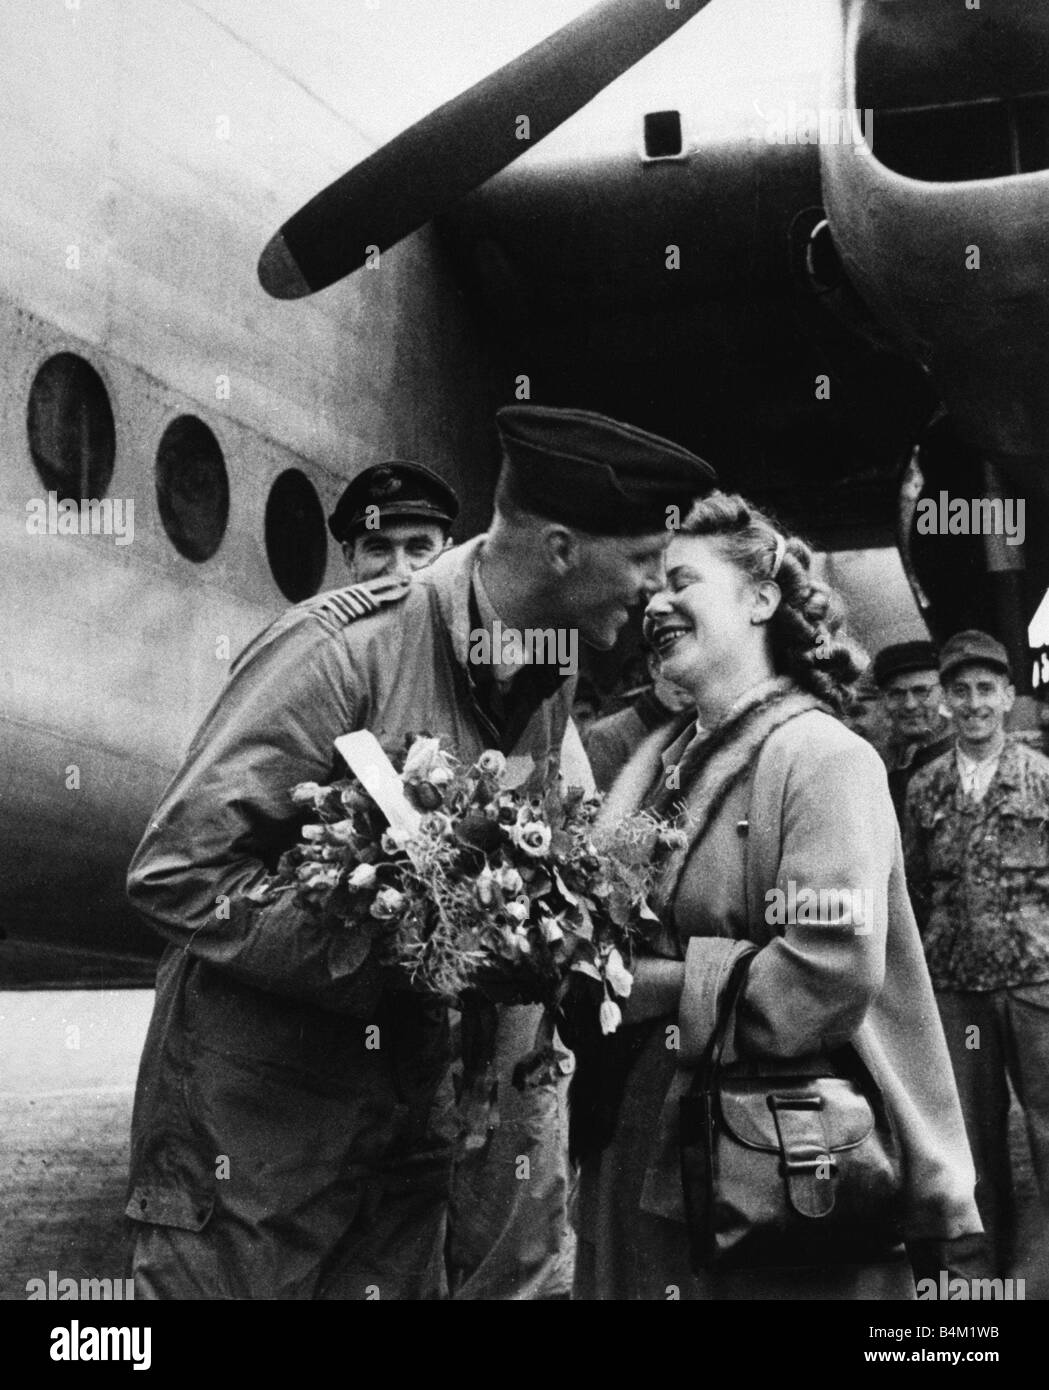 Berlin Air Lift 1948 A German woman shows her appreciation to a British pilot During the Allied powers response to the Russian blockade was in essence simple yet in practice extremely complicated Hundreds of aircraft from the RAF and the USAF flew from Allied bases in West Germany to RAF Gatow in West Berlin Their cargo was largely food but also included medical supplies candles blankets infact anything and everything necessary to keep West Berlin from collapsing The Russians had blockaded the roads and rail lines but couldn t stop the aircraft To do so involved too great a risk of blundering Stock Photo